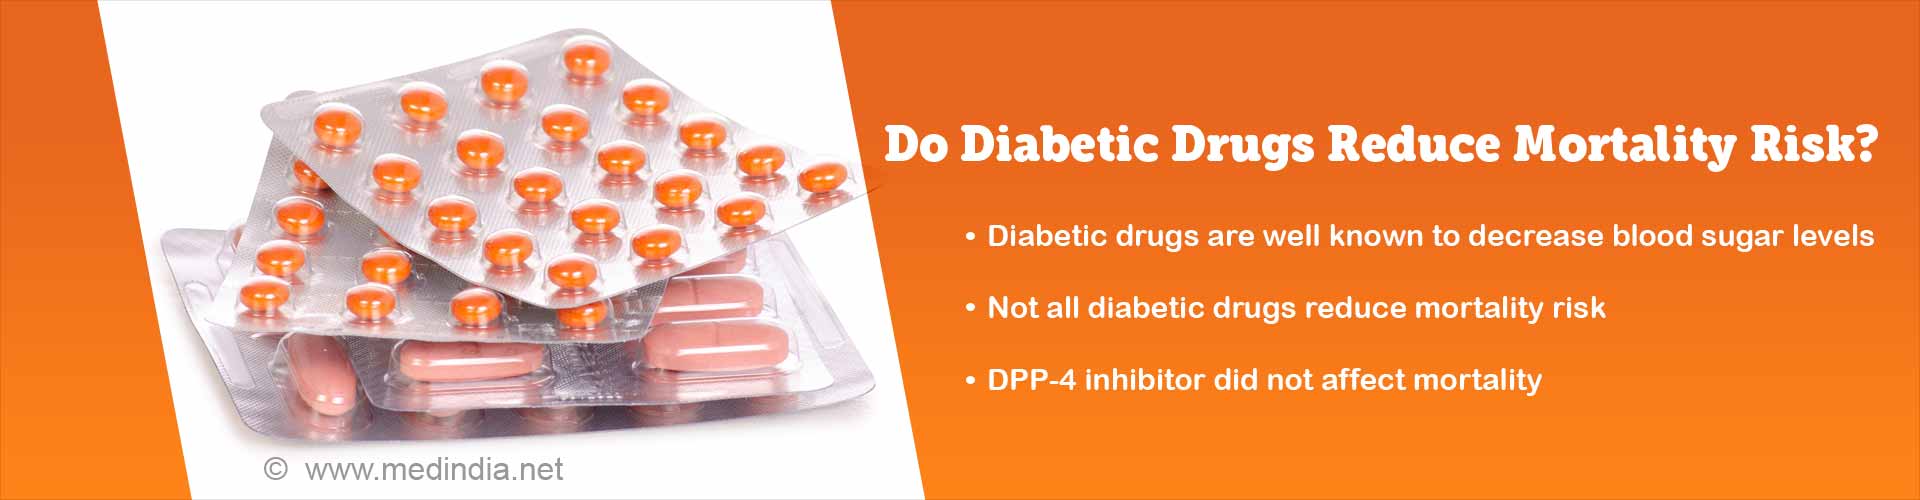 do diabetic drugs reduce mortality risk?
- diabetic drugs are well known to decrease blood sugar levels
- not all diabetic drugs reduce mortality risk
- DPP-4 inhibitor did not affect mortality